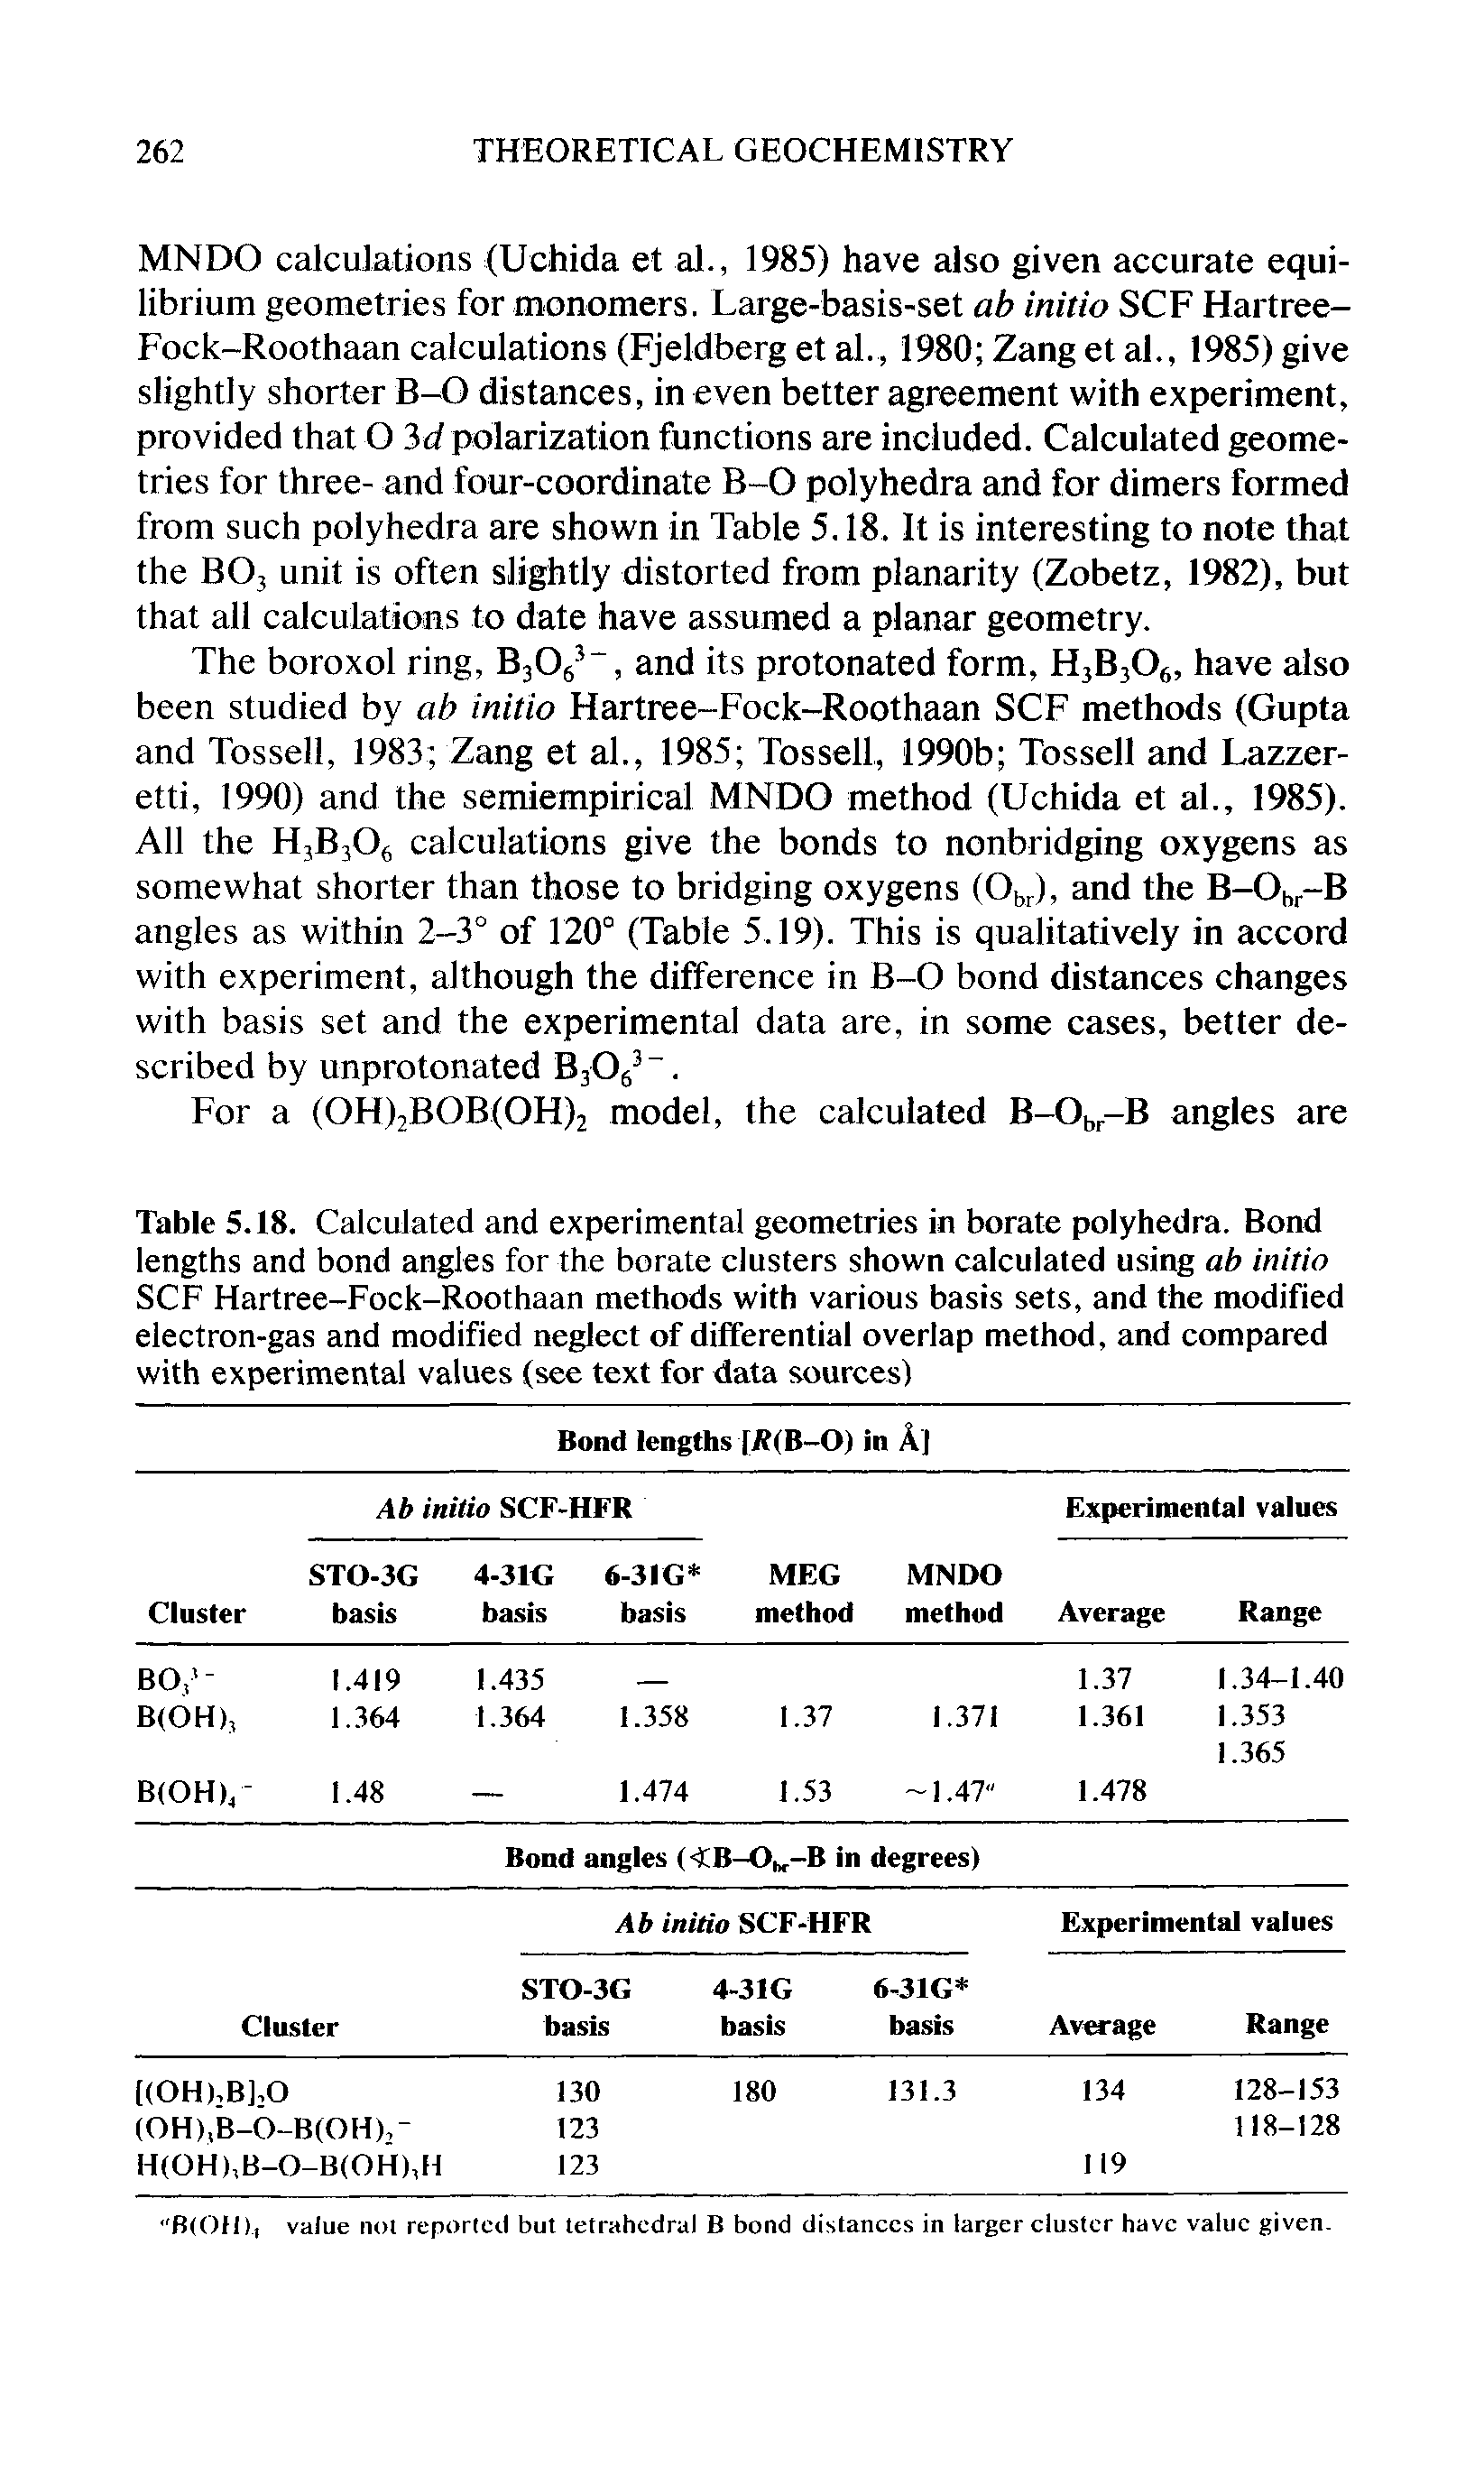 Table 5.18. Calculated and experimental geometries in borate polyhedra. Bond lengths and bond angles for the borate clusters shown calculated using ab initio SCF Hartree-Fock-Roothaan methods with various basis sets, and the modified electron-gas and modified neglect of differential overlap method, and compared with experimental values (see text for data sources)...